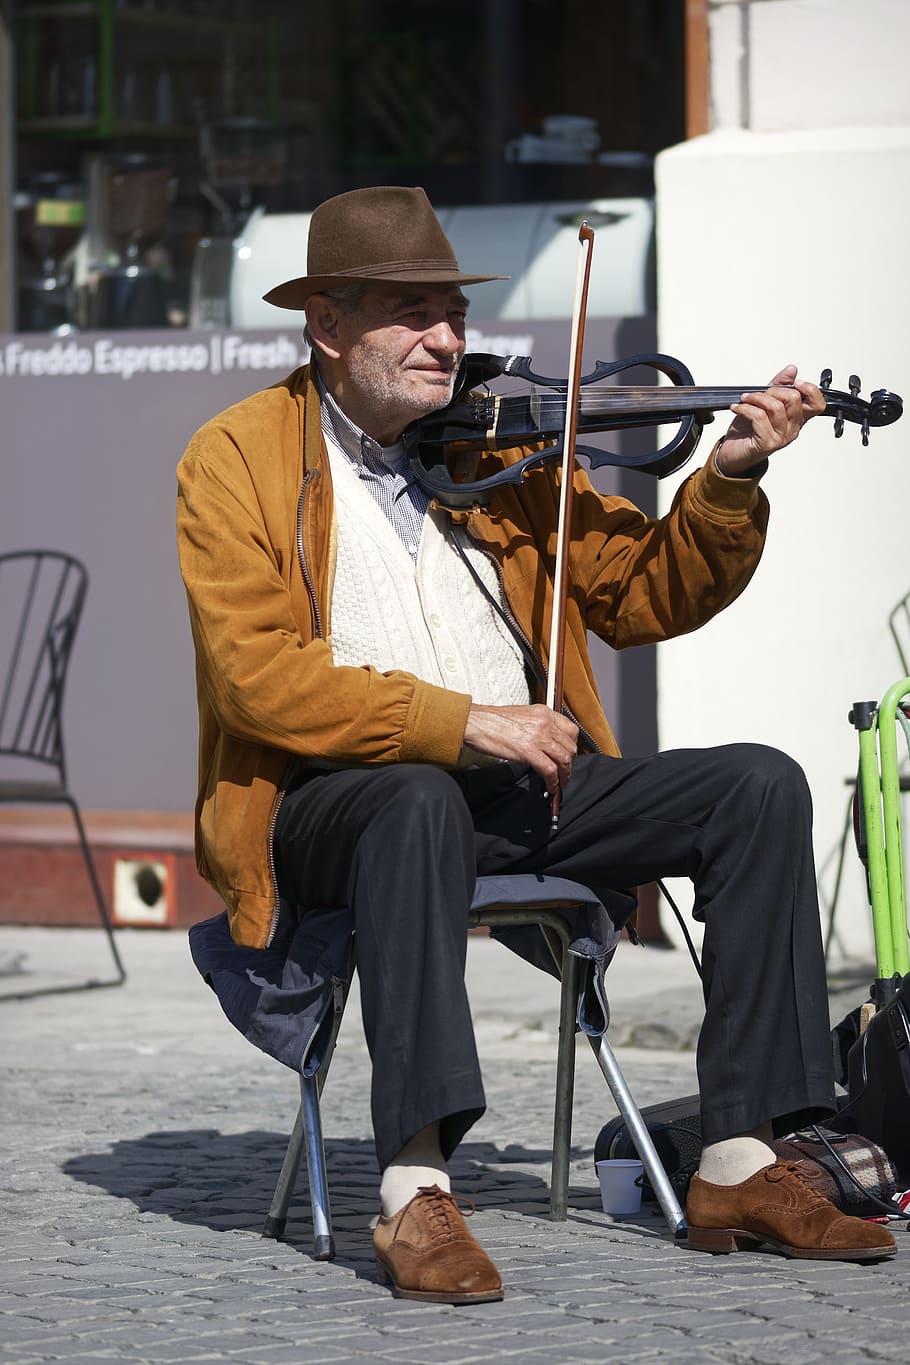 man, old, violin, singing, male, adult, the person, interpreting, music, classical